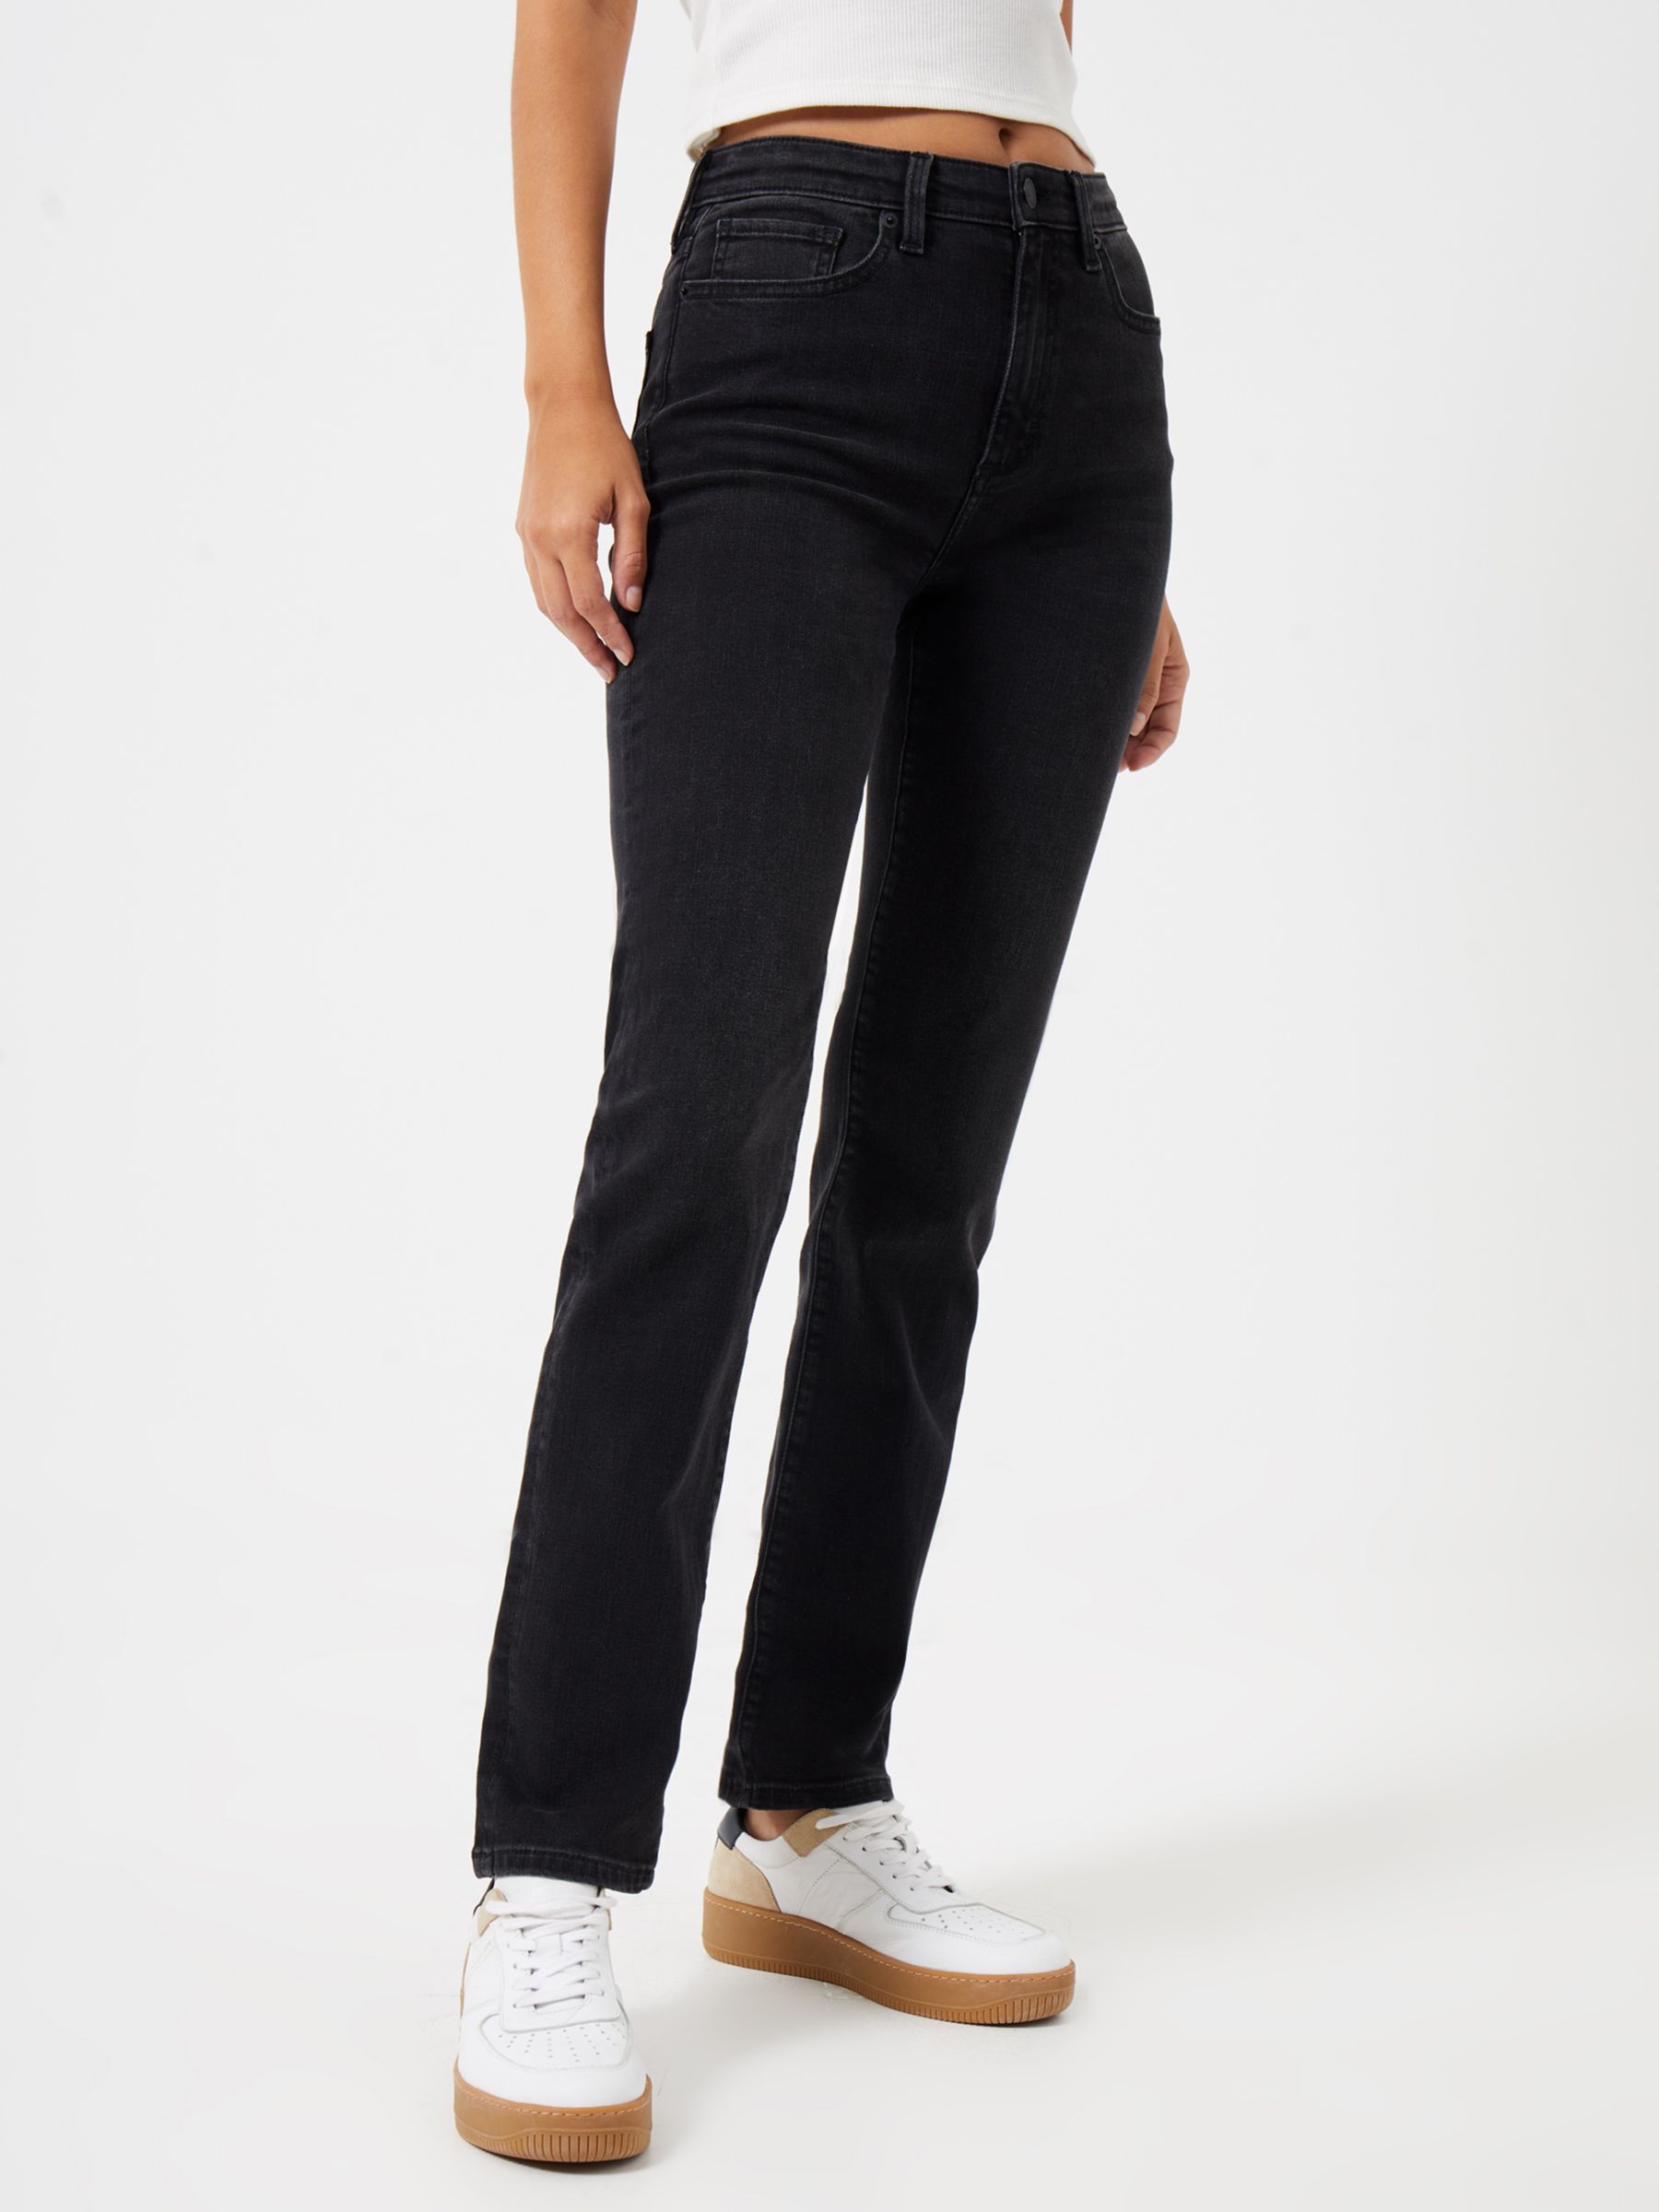 French Connection Stretch Slim Jeans